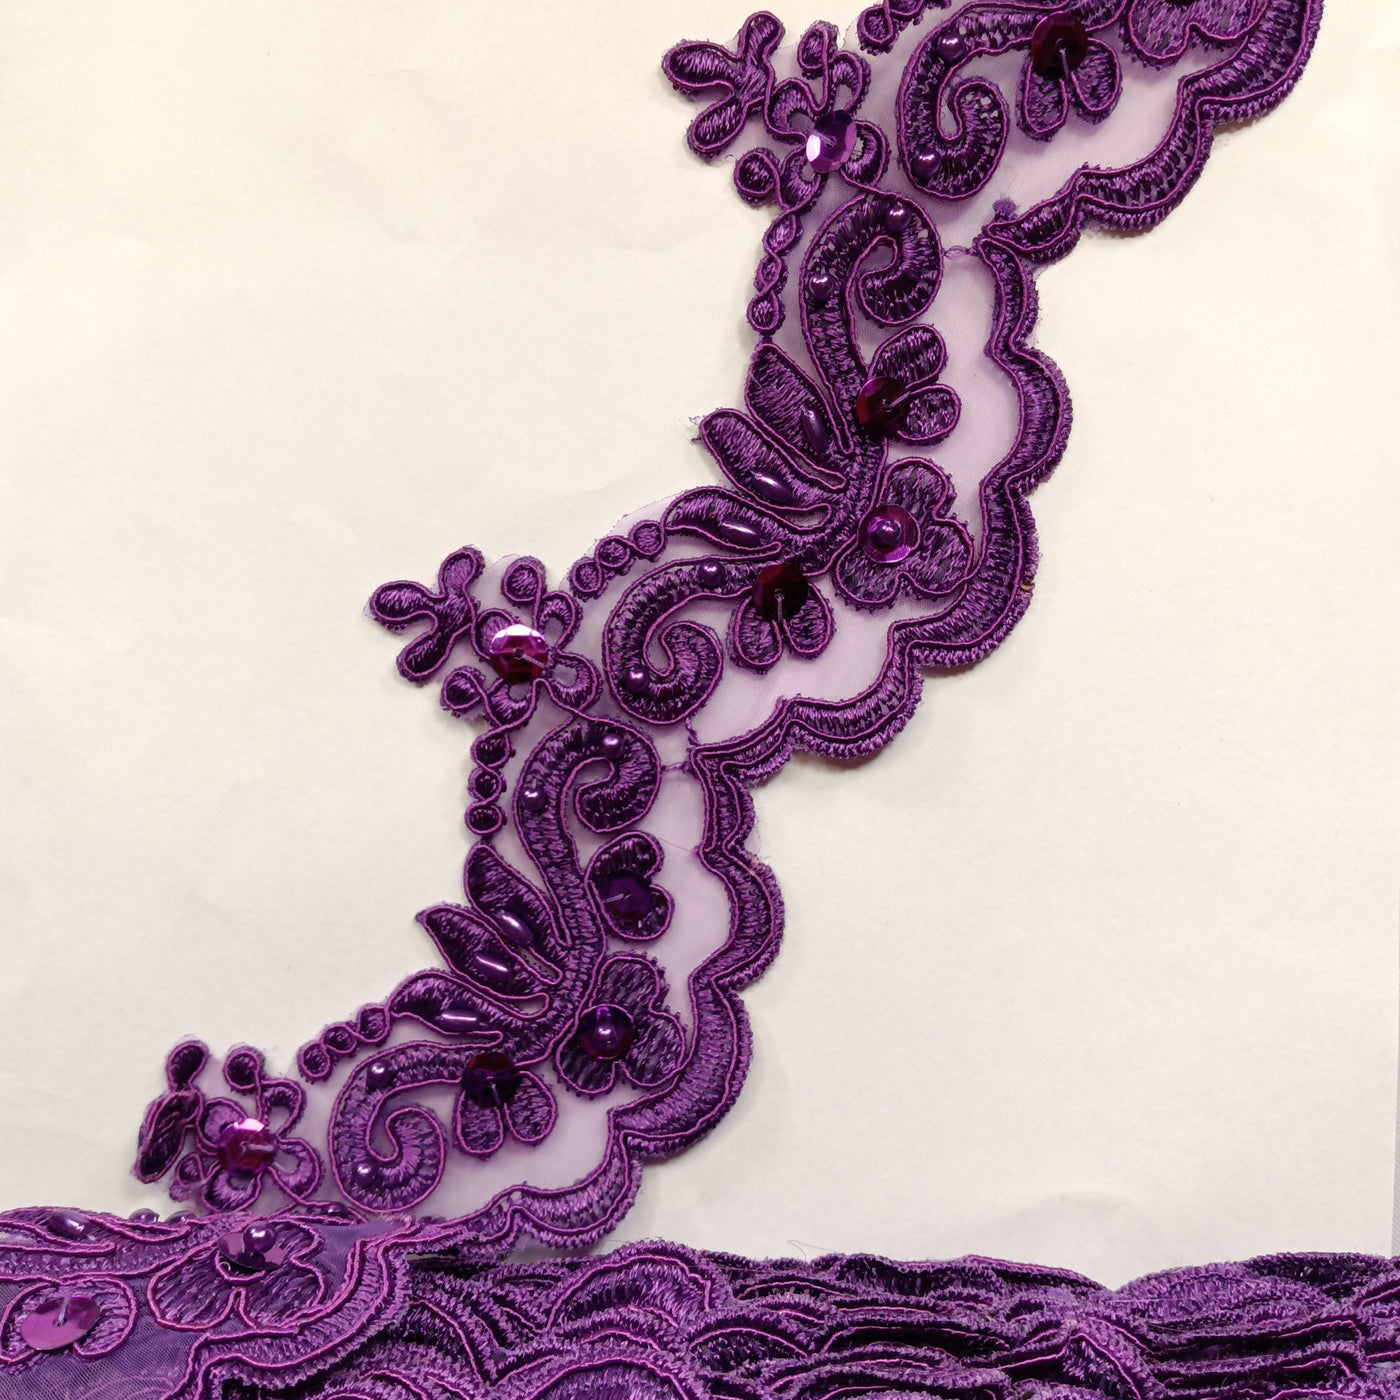 Corded, Beaded & Embroidered Purple Trimming. Lace Usa